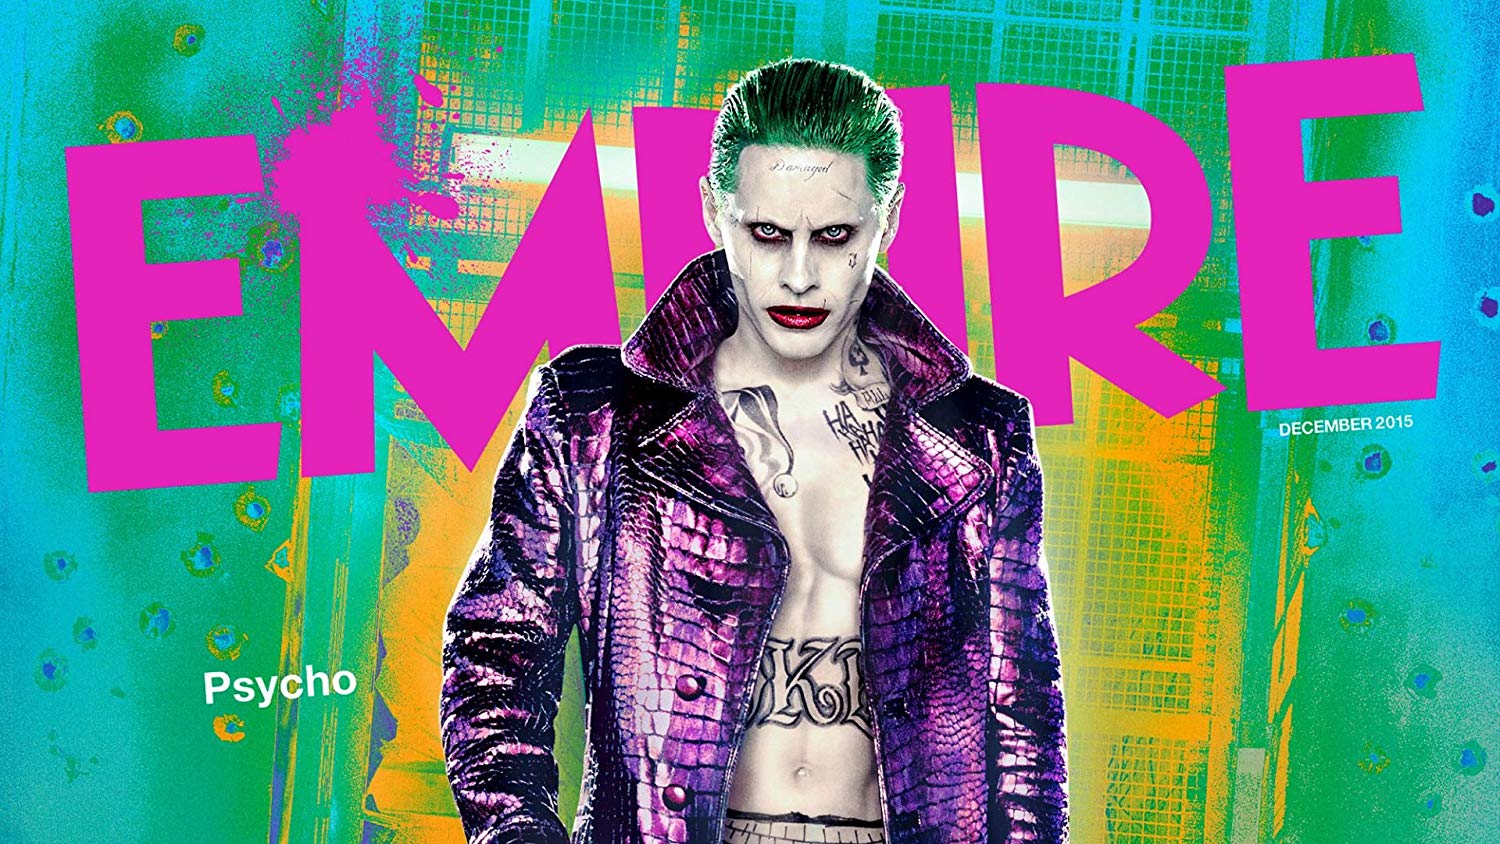 7. The Joker's blonde hair in the film "Suicide Squad" - wide 5